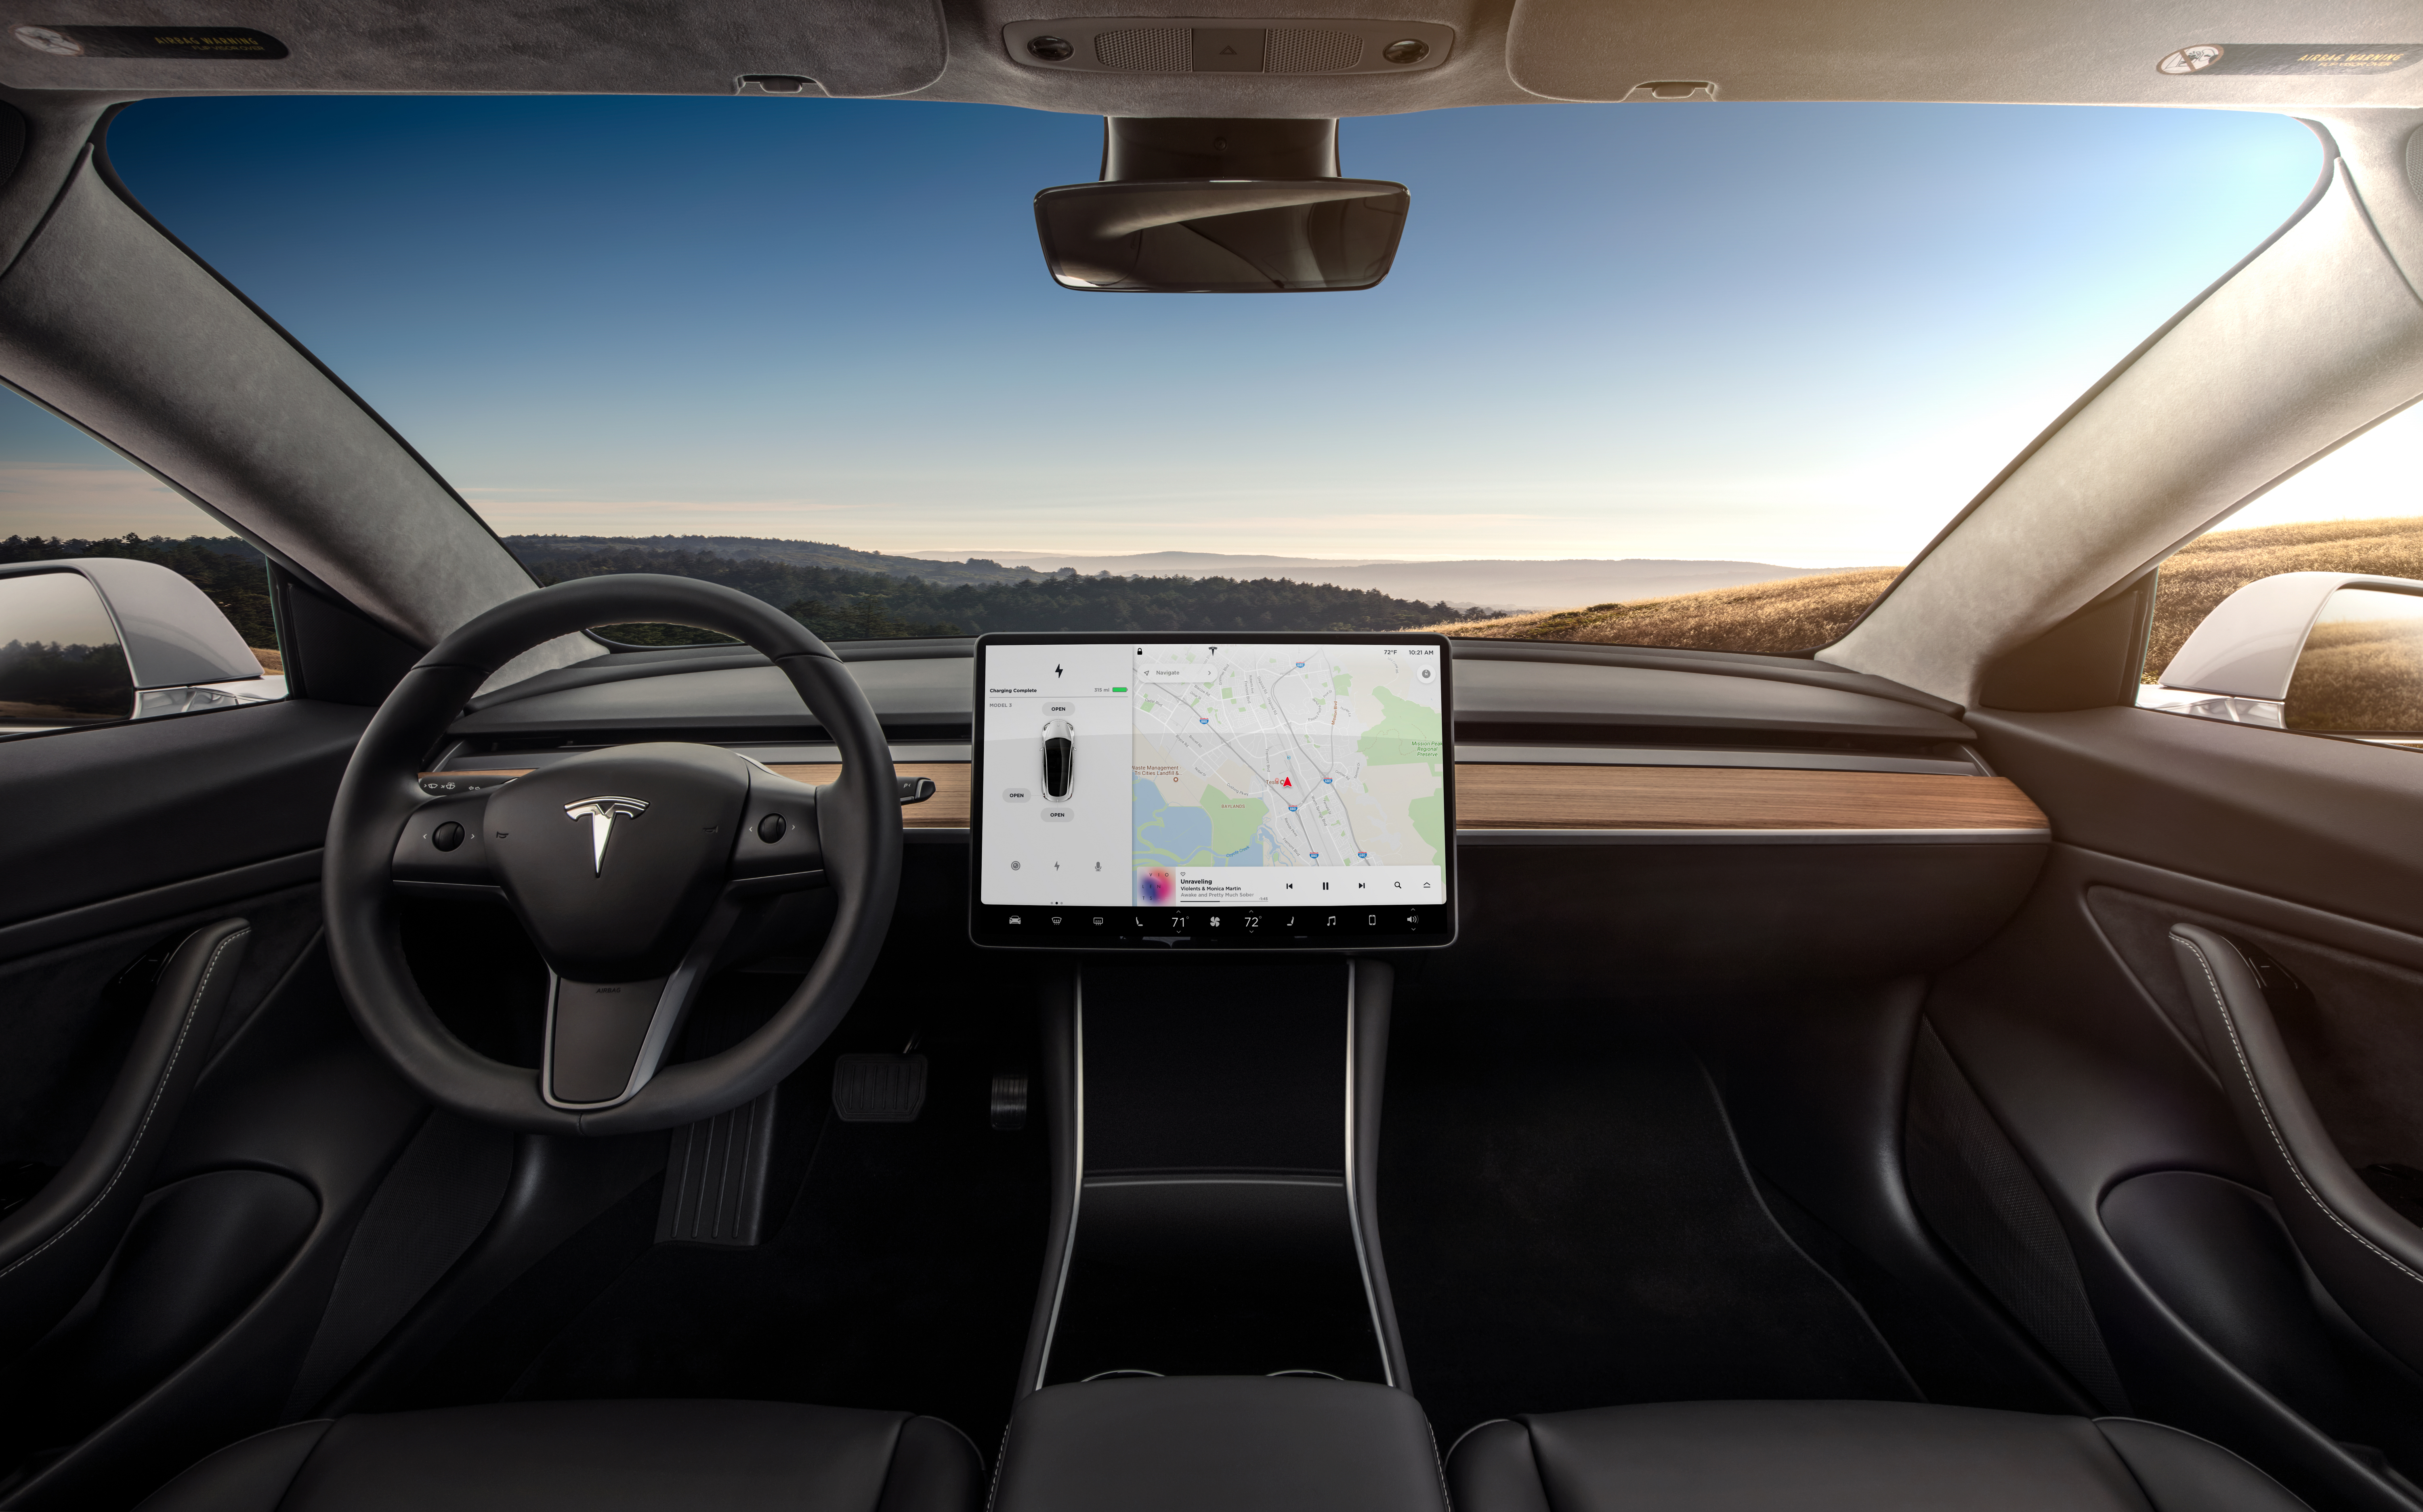 Tesla’s Model 3 interior (even the steering wheel) is now 100% leather-free